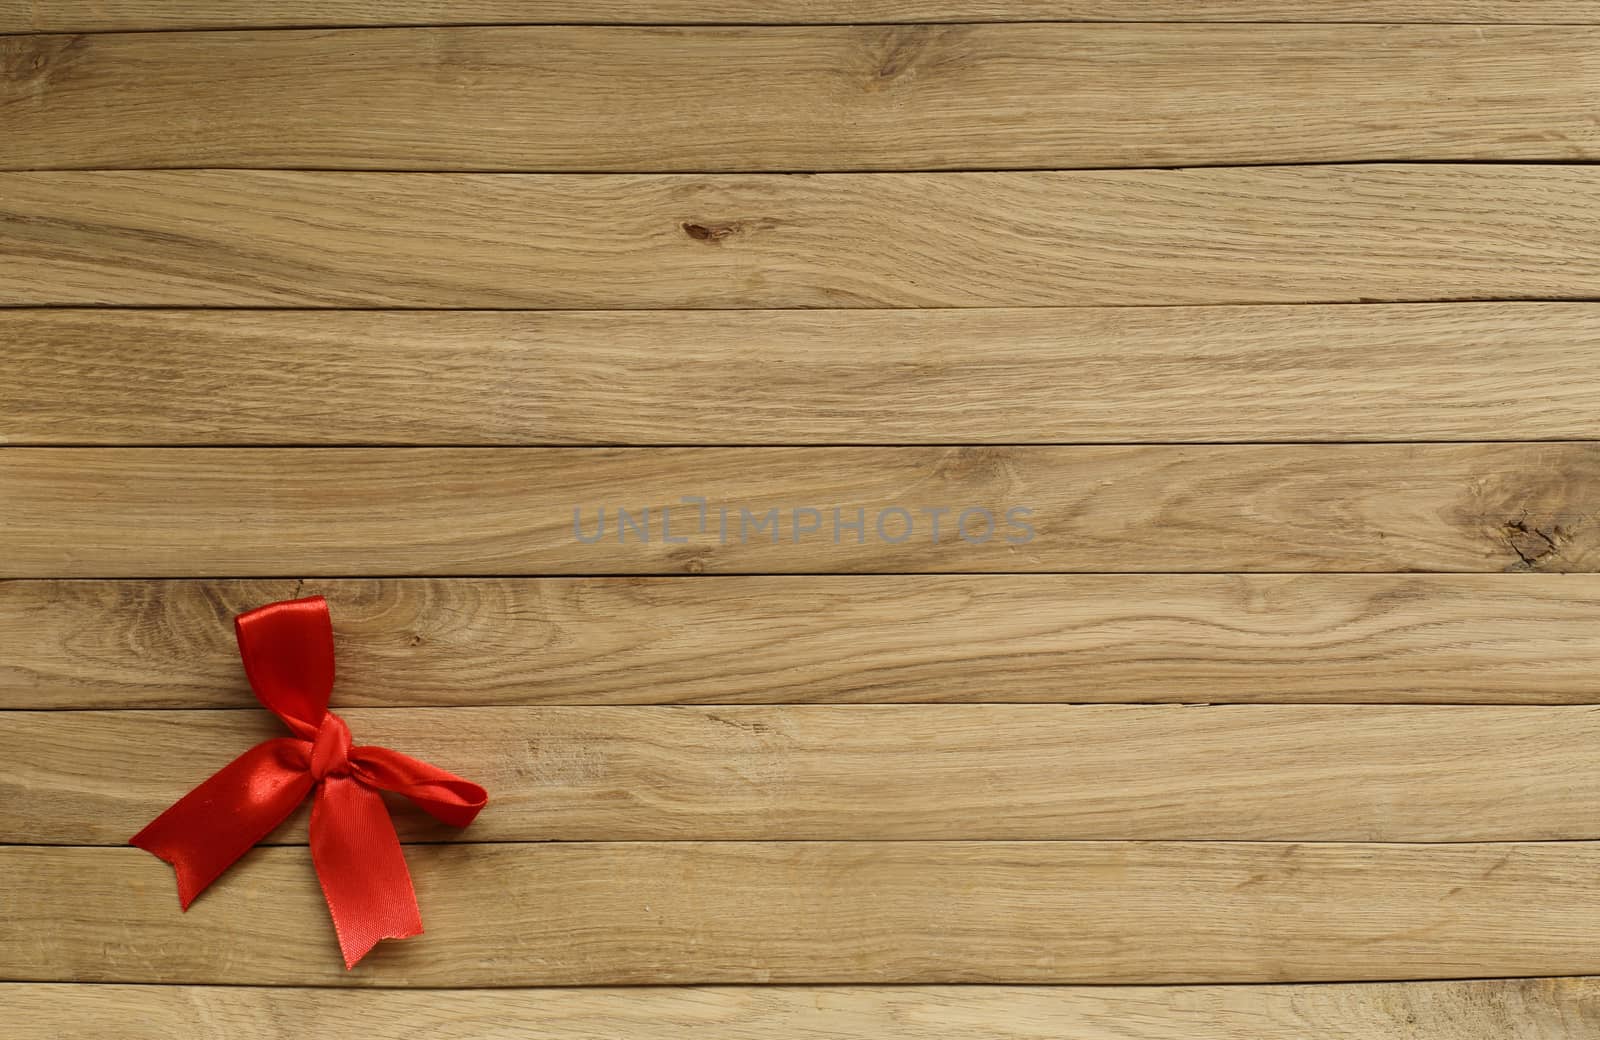 old boards of oak. in the lower left corner is a red bow. suitable for background.